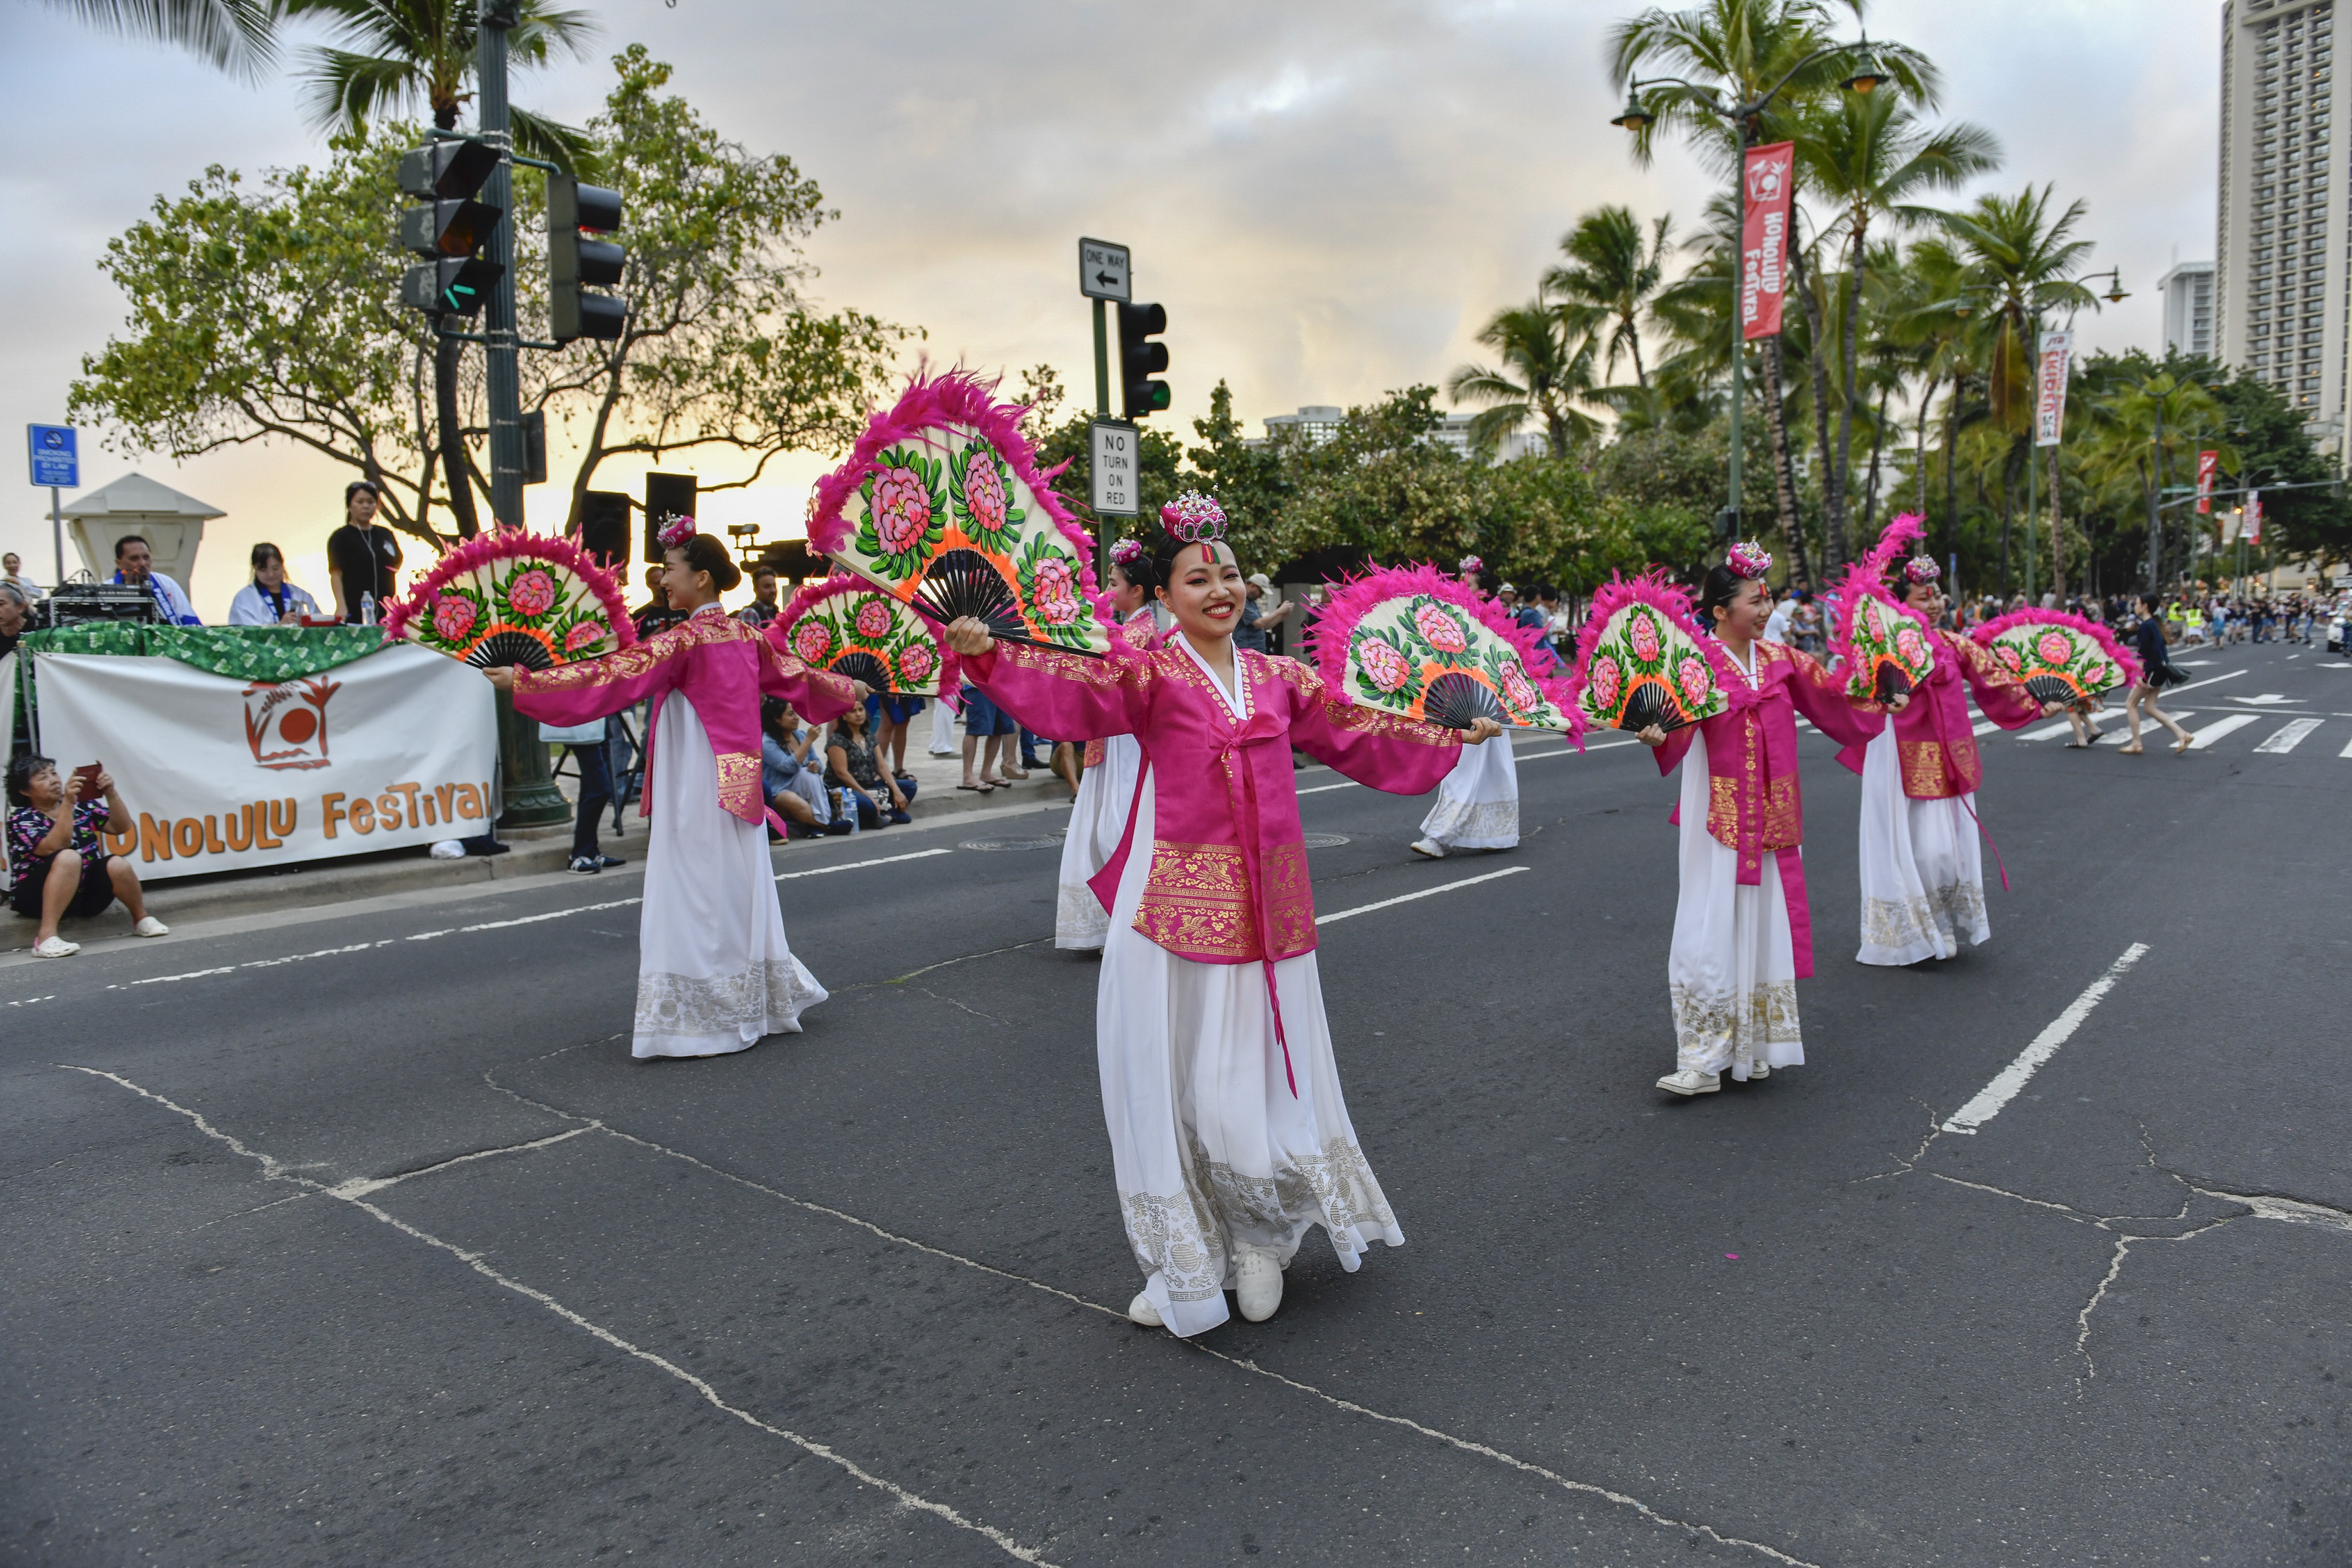 Hundreds of performers will dazzle audiences through the 2-mile parade route in the heart of Waikiki.